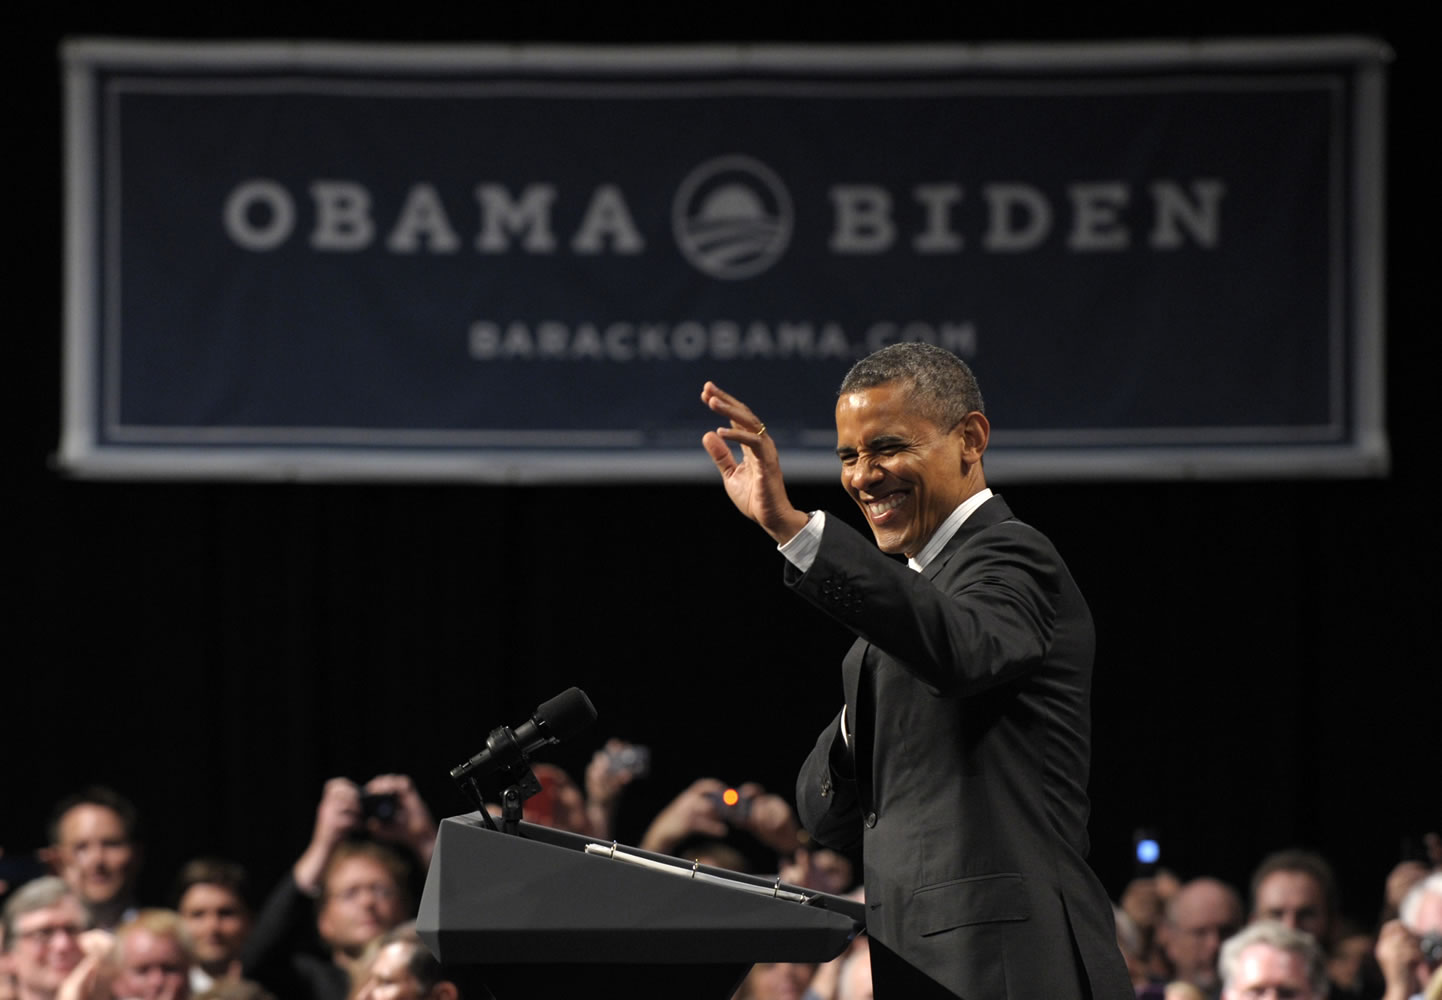 President Barack Obama attends a fundraising event at the Oregon Convention Center in Portland on Tuesday, July 24.